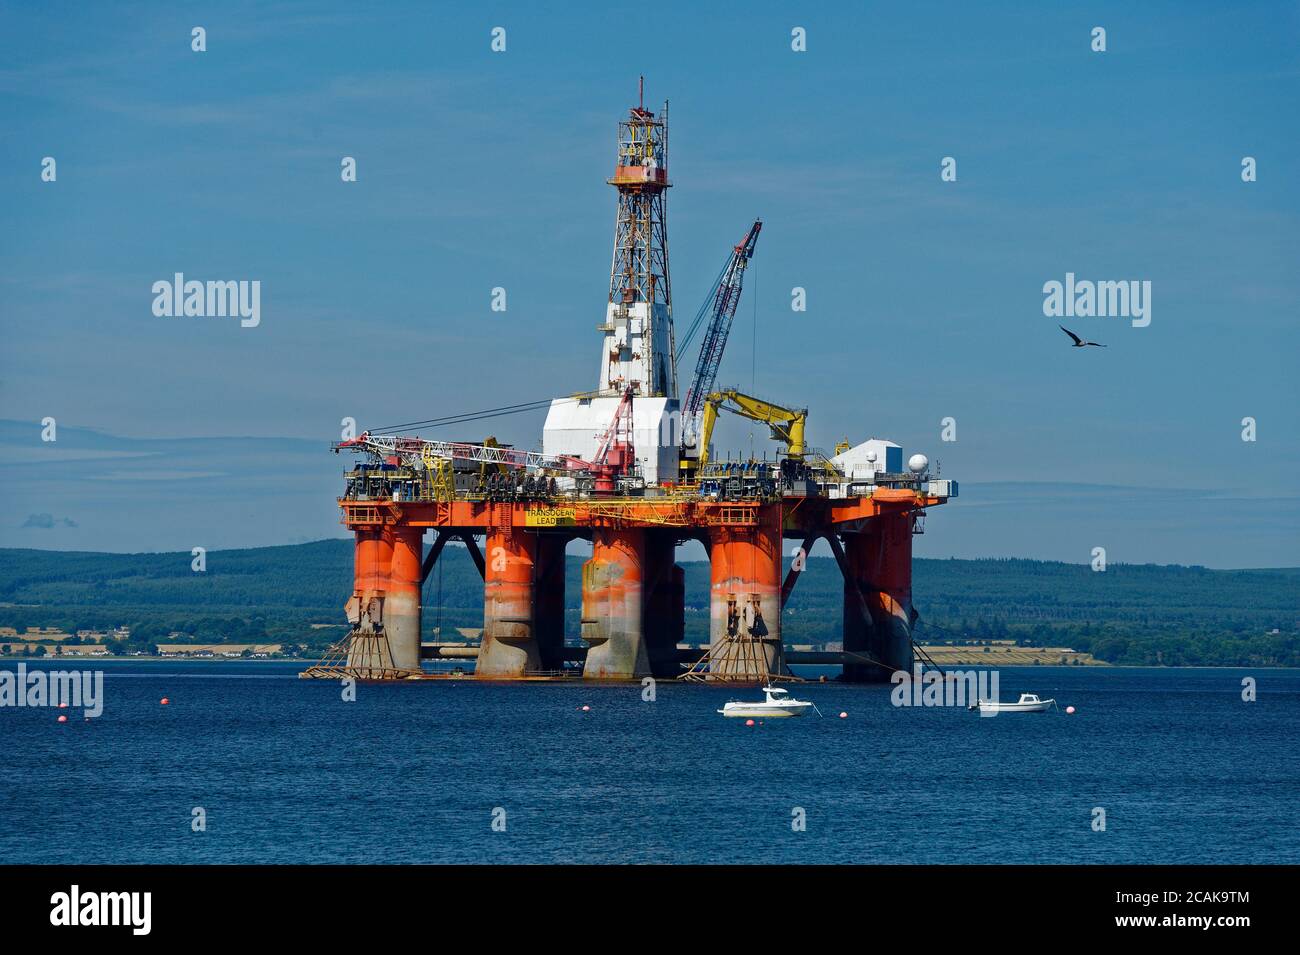 A semi-submersible Oil Rig moored in the Cromarty Firth, Highland, Scotland Stock Photo